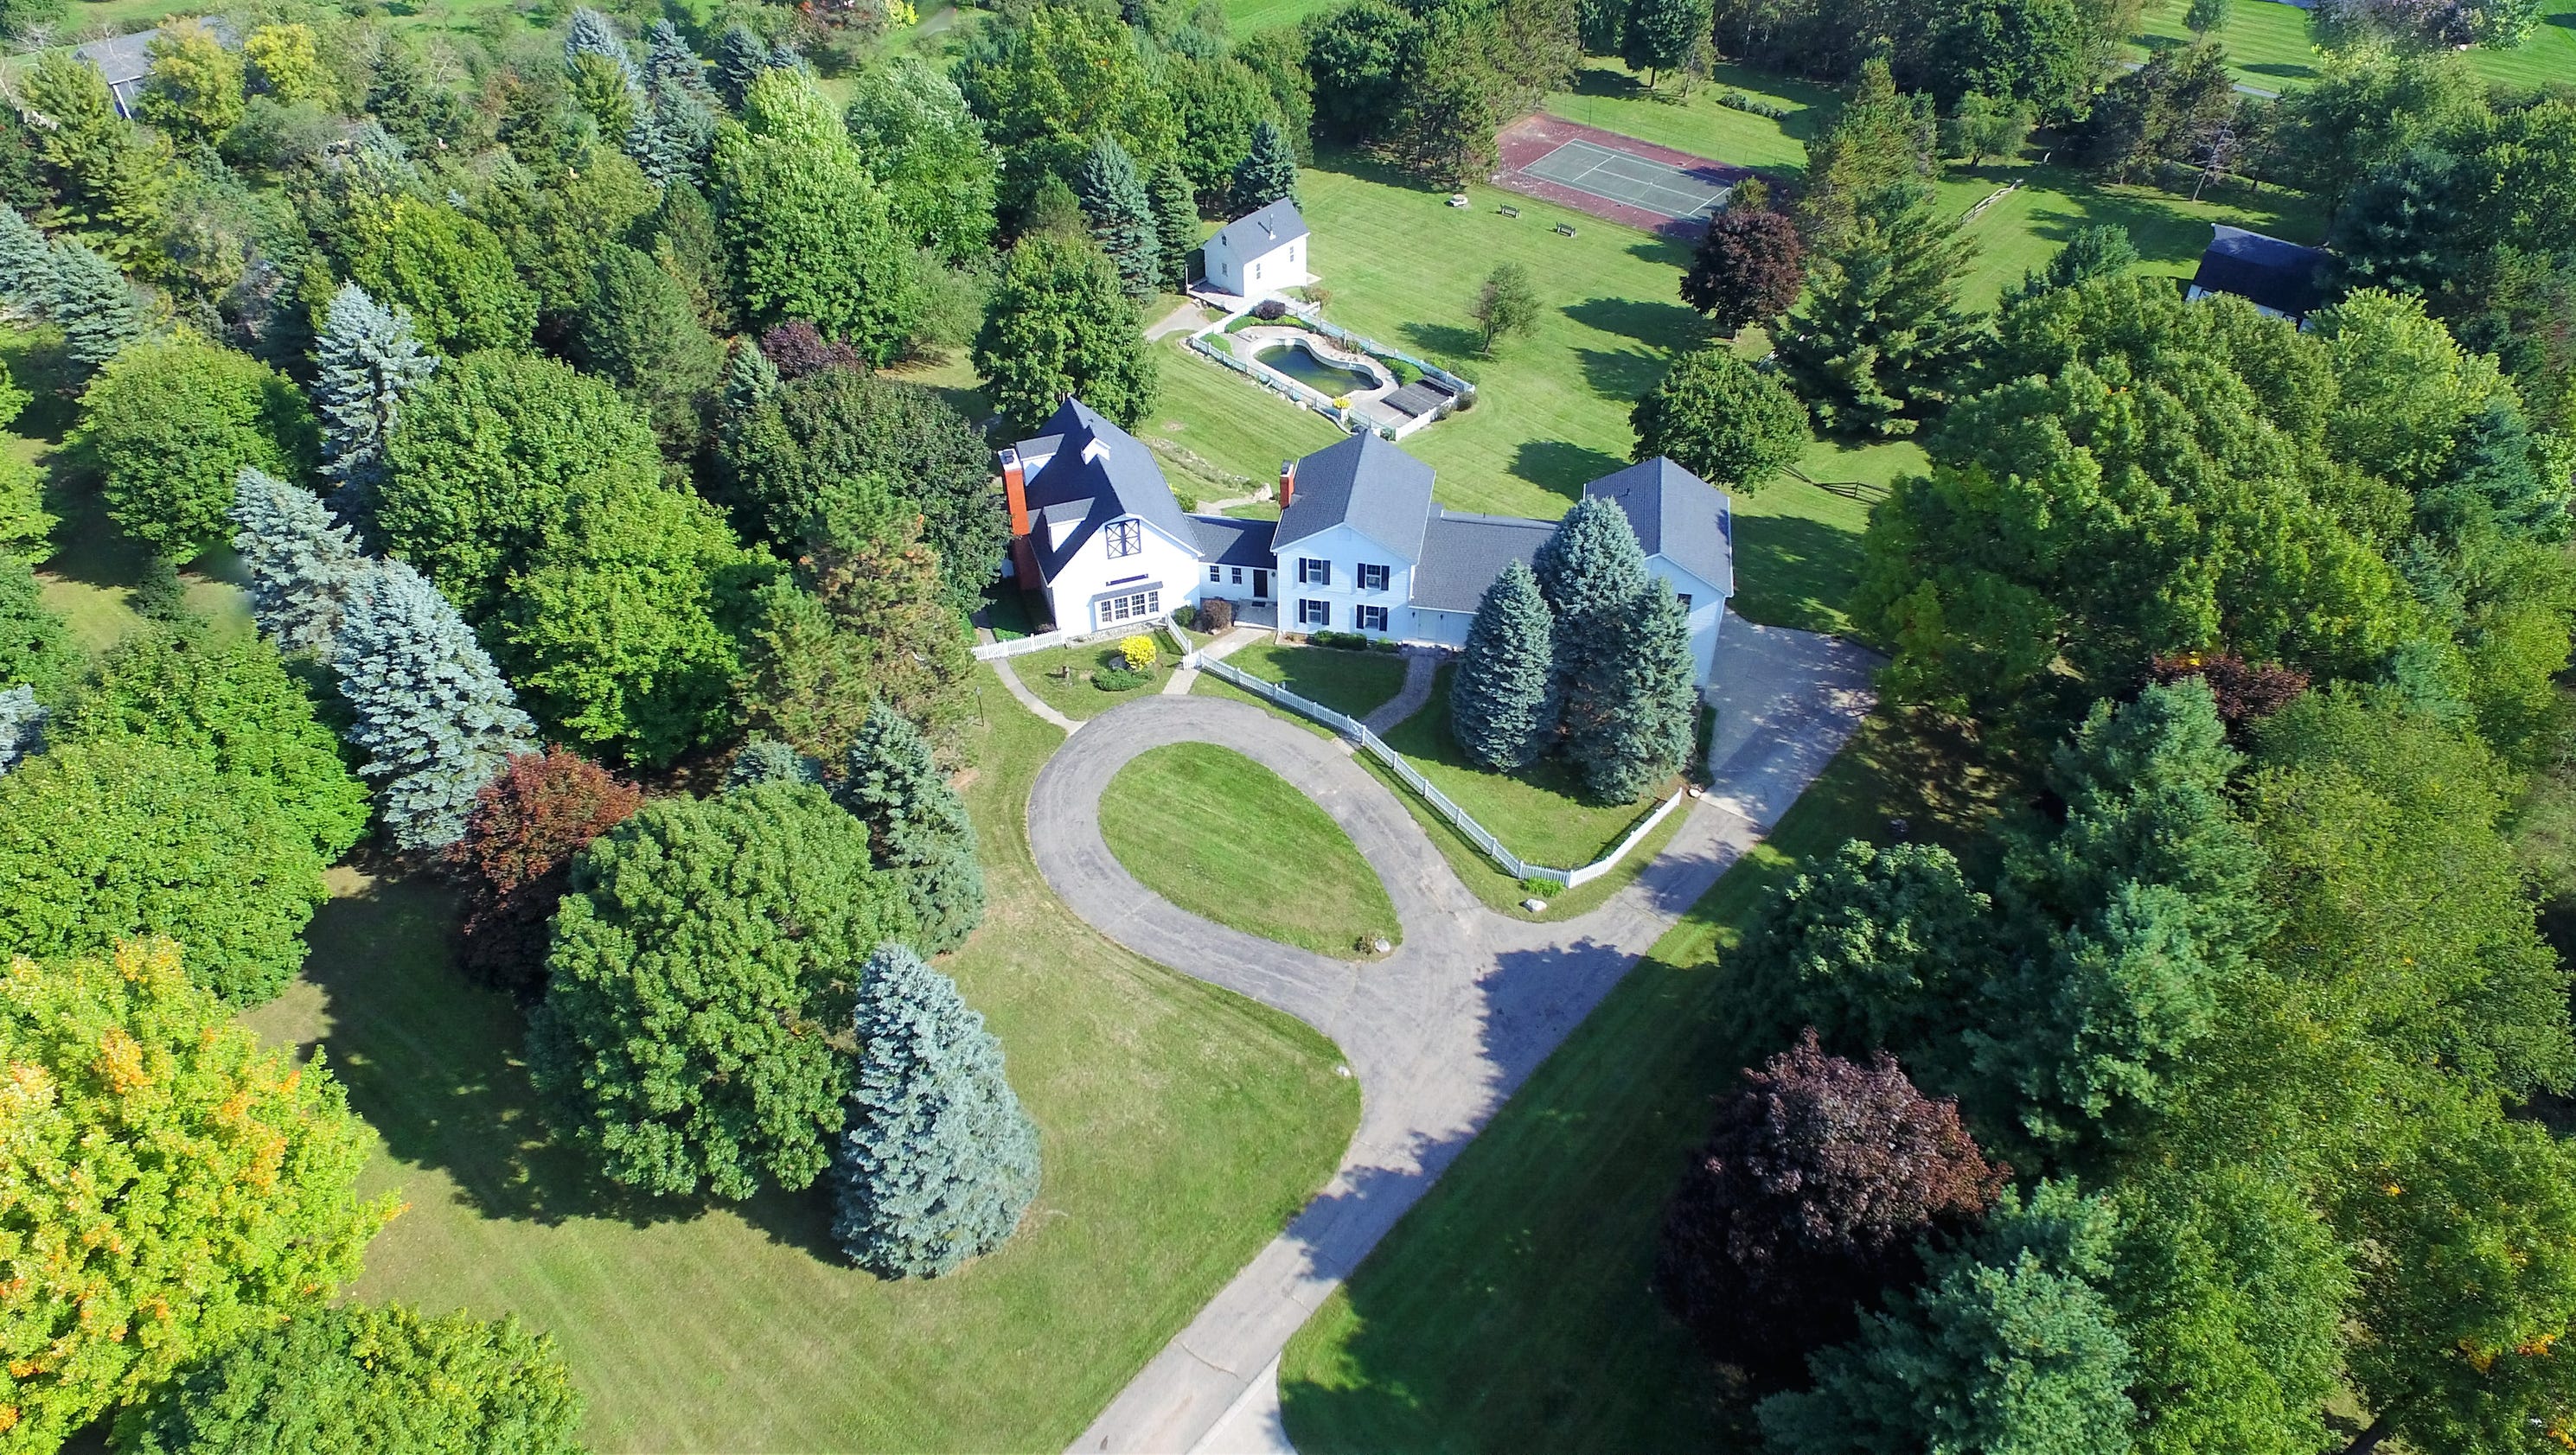 Kid Rock's posh childhood home listed in Macomb County for $1.3M